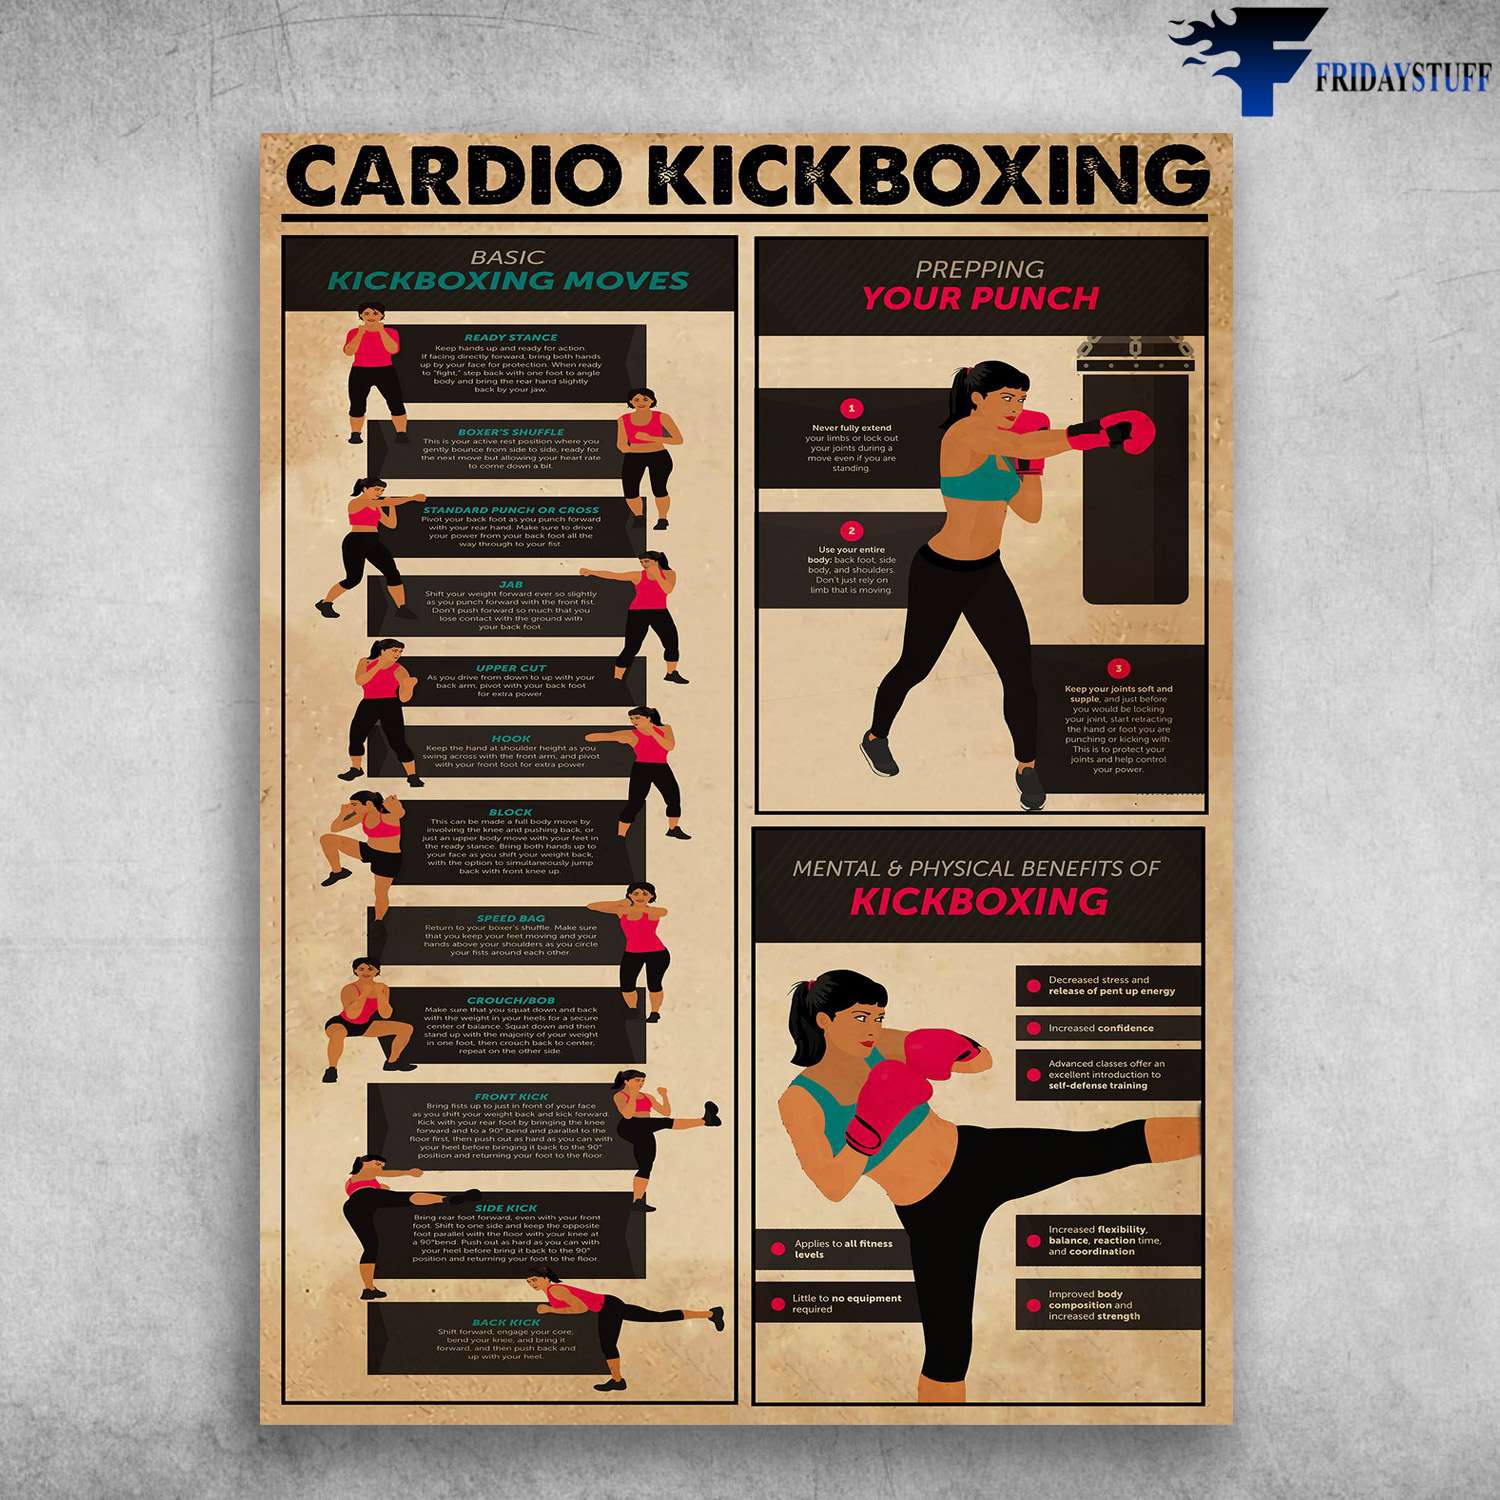 Cardio Kickboxing Basic Kickboxing Moves Prepping Your Punch Mental And Physical Benefits Of Kickboxing 